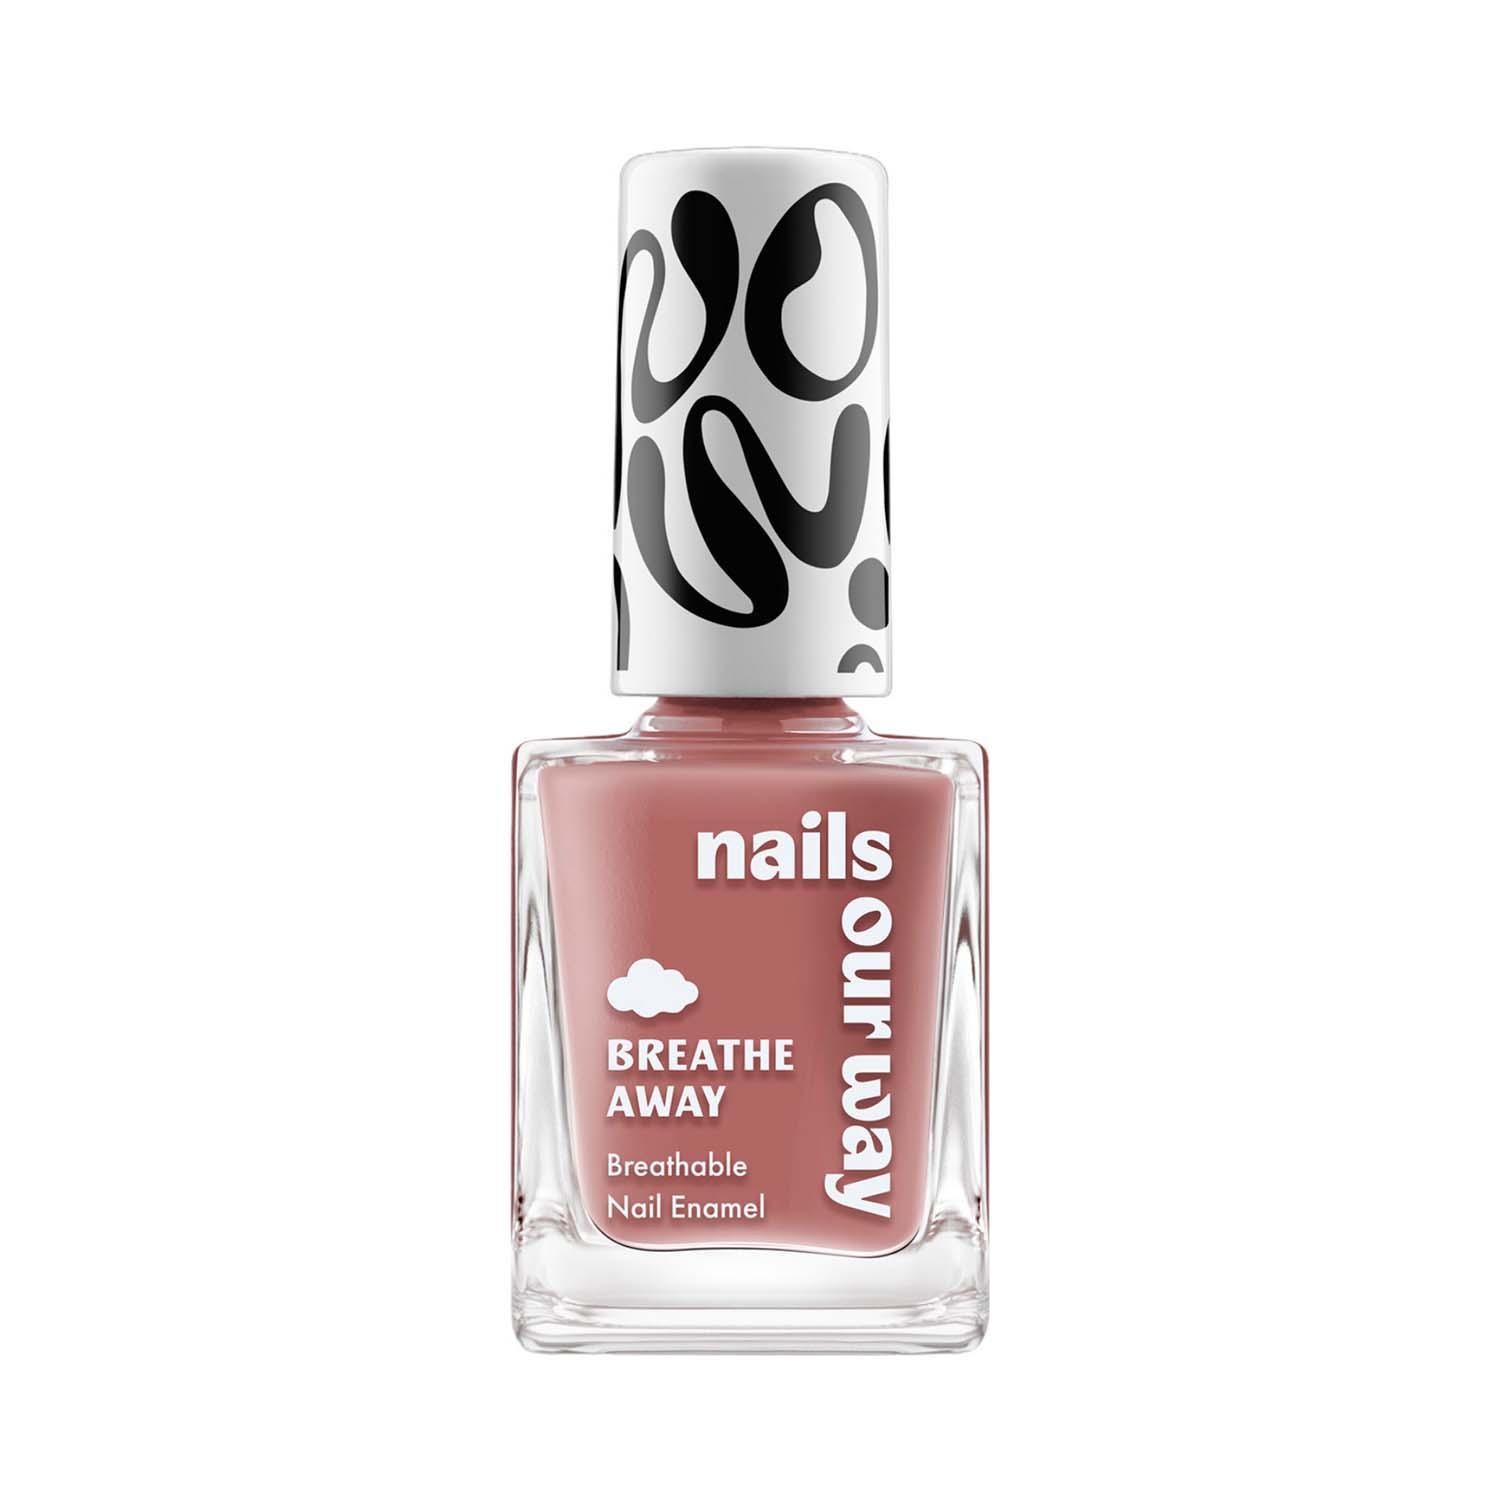 Nails Our Way | Nails Our Way Breathe Away Nail Enamel - Cocoa (10 ml)